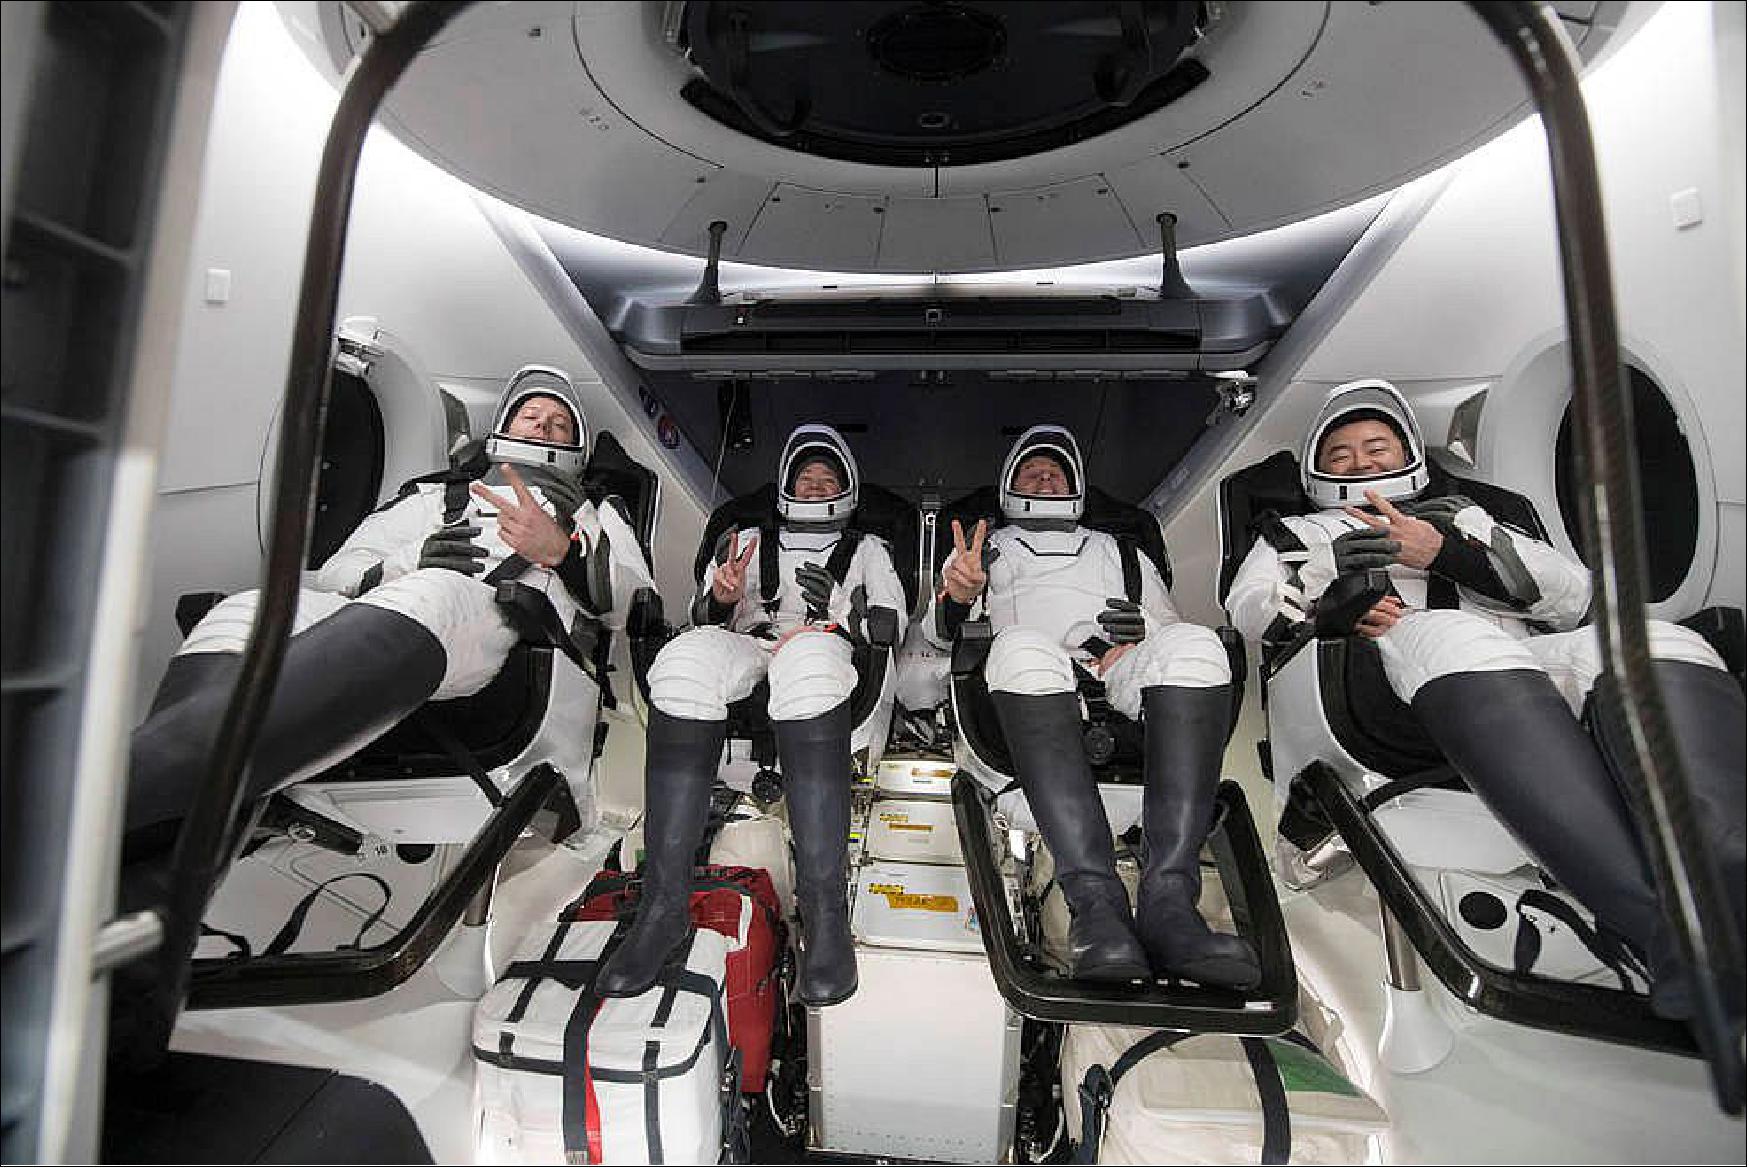 Figure 6: ESA (European Space Agency) astronaut Thomas Pesquet, left, NASA astronauts Megan McArthur and Shane Kimbrough, and Japan Aerospace Exploration Agency (JAXA) astronaut Aki Hoshide, right, are seen inside the SpaceX Crew Dragon Endeavour spacecraft onboard the SpaceX GO Navigator recovery ship shortly after having landed in the Gulf of Mexico off the coast of Pensacola, Florida, Monday, Nov. 8, 2021. NASA’s SpaceX Crew-2 mission is the second operational mission of the SpaceX Crew Dragon spacecraft and Falcon 9 rocket to the International Space Station as part of the agency’s Commercial Crew Program (image credits: NASA/Aubrey Gemignani)